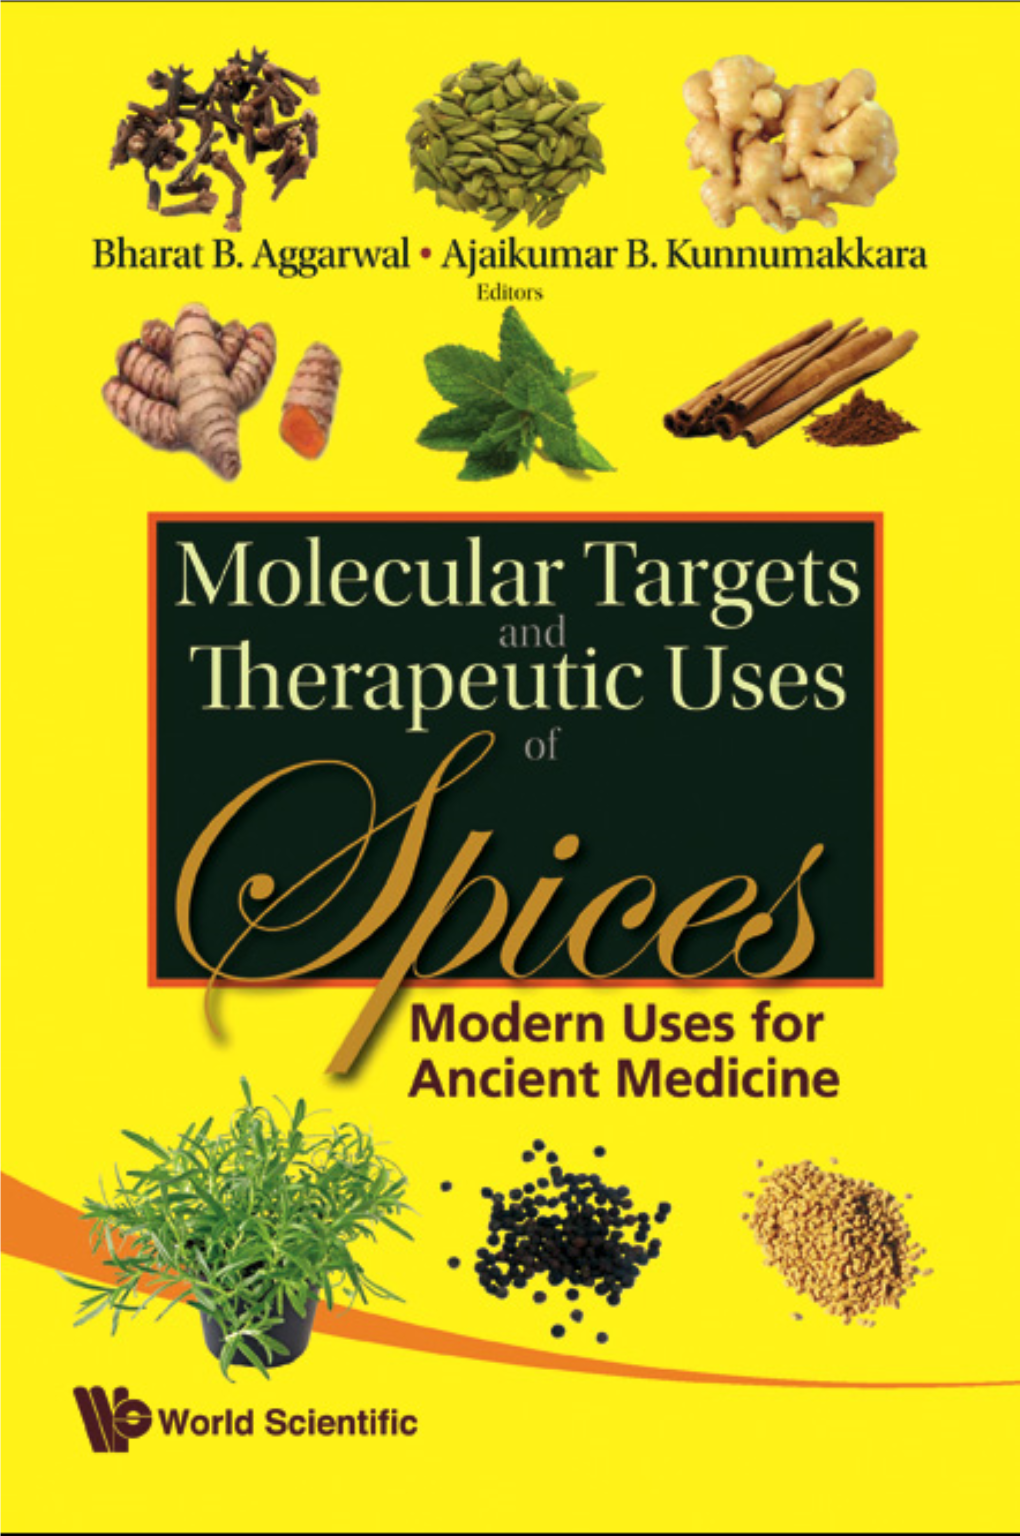 MOLECULAR TARGETS and THERAPEUTIC USES of SPICES Modern Uses for Ancient Medicine Copyright © 2009 by World Scientific Publishing Co